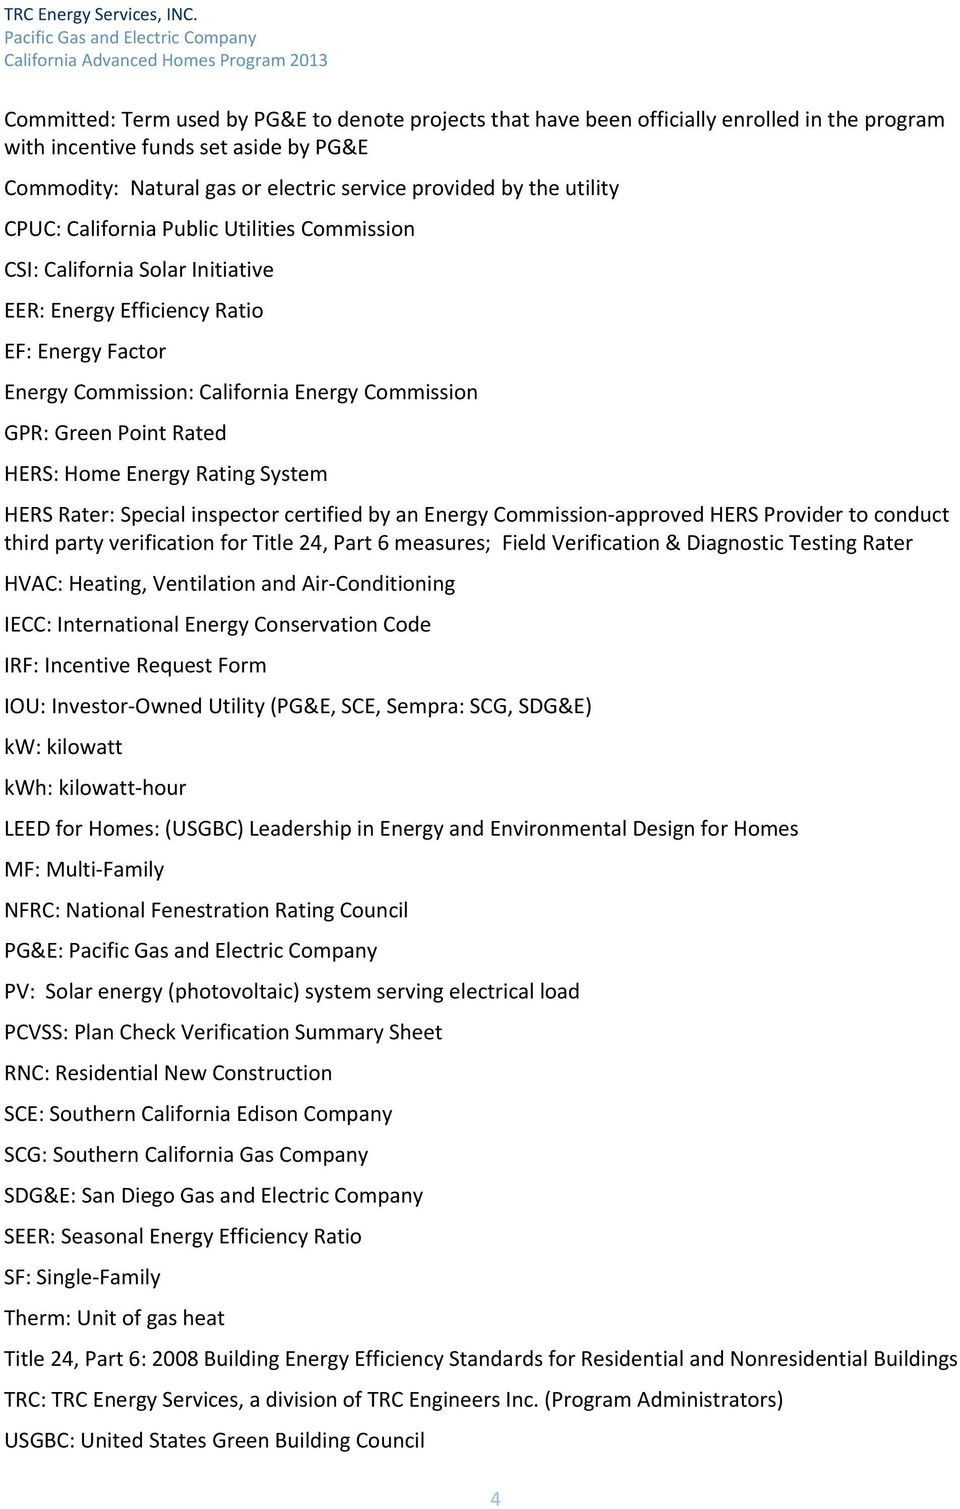 aside by PG&E Commodity: Natural gas or electric service provided by the utility CPUC: California Public Utilities Commission CSI: California Solar Initiative EER: Energy Efficiency Ratio EF: Energy